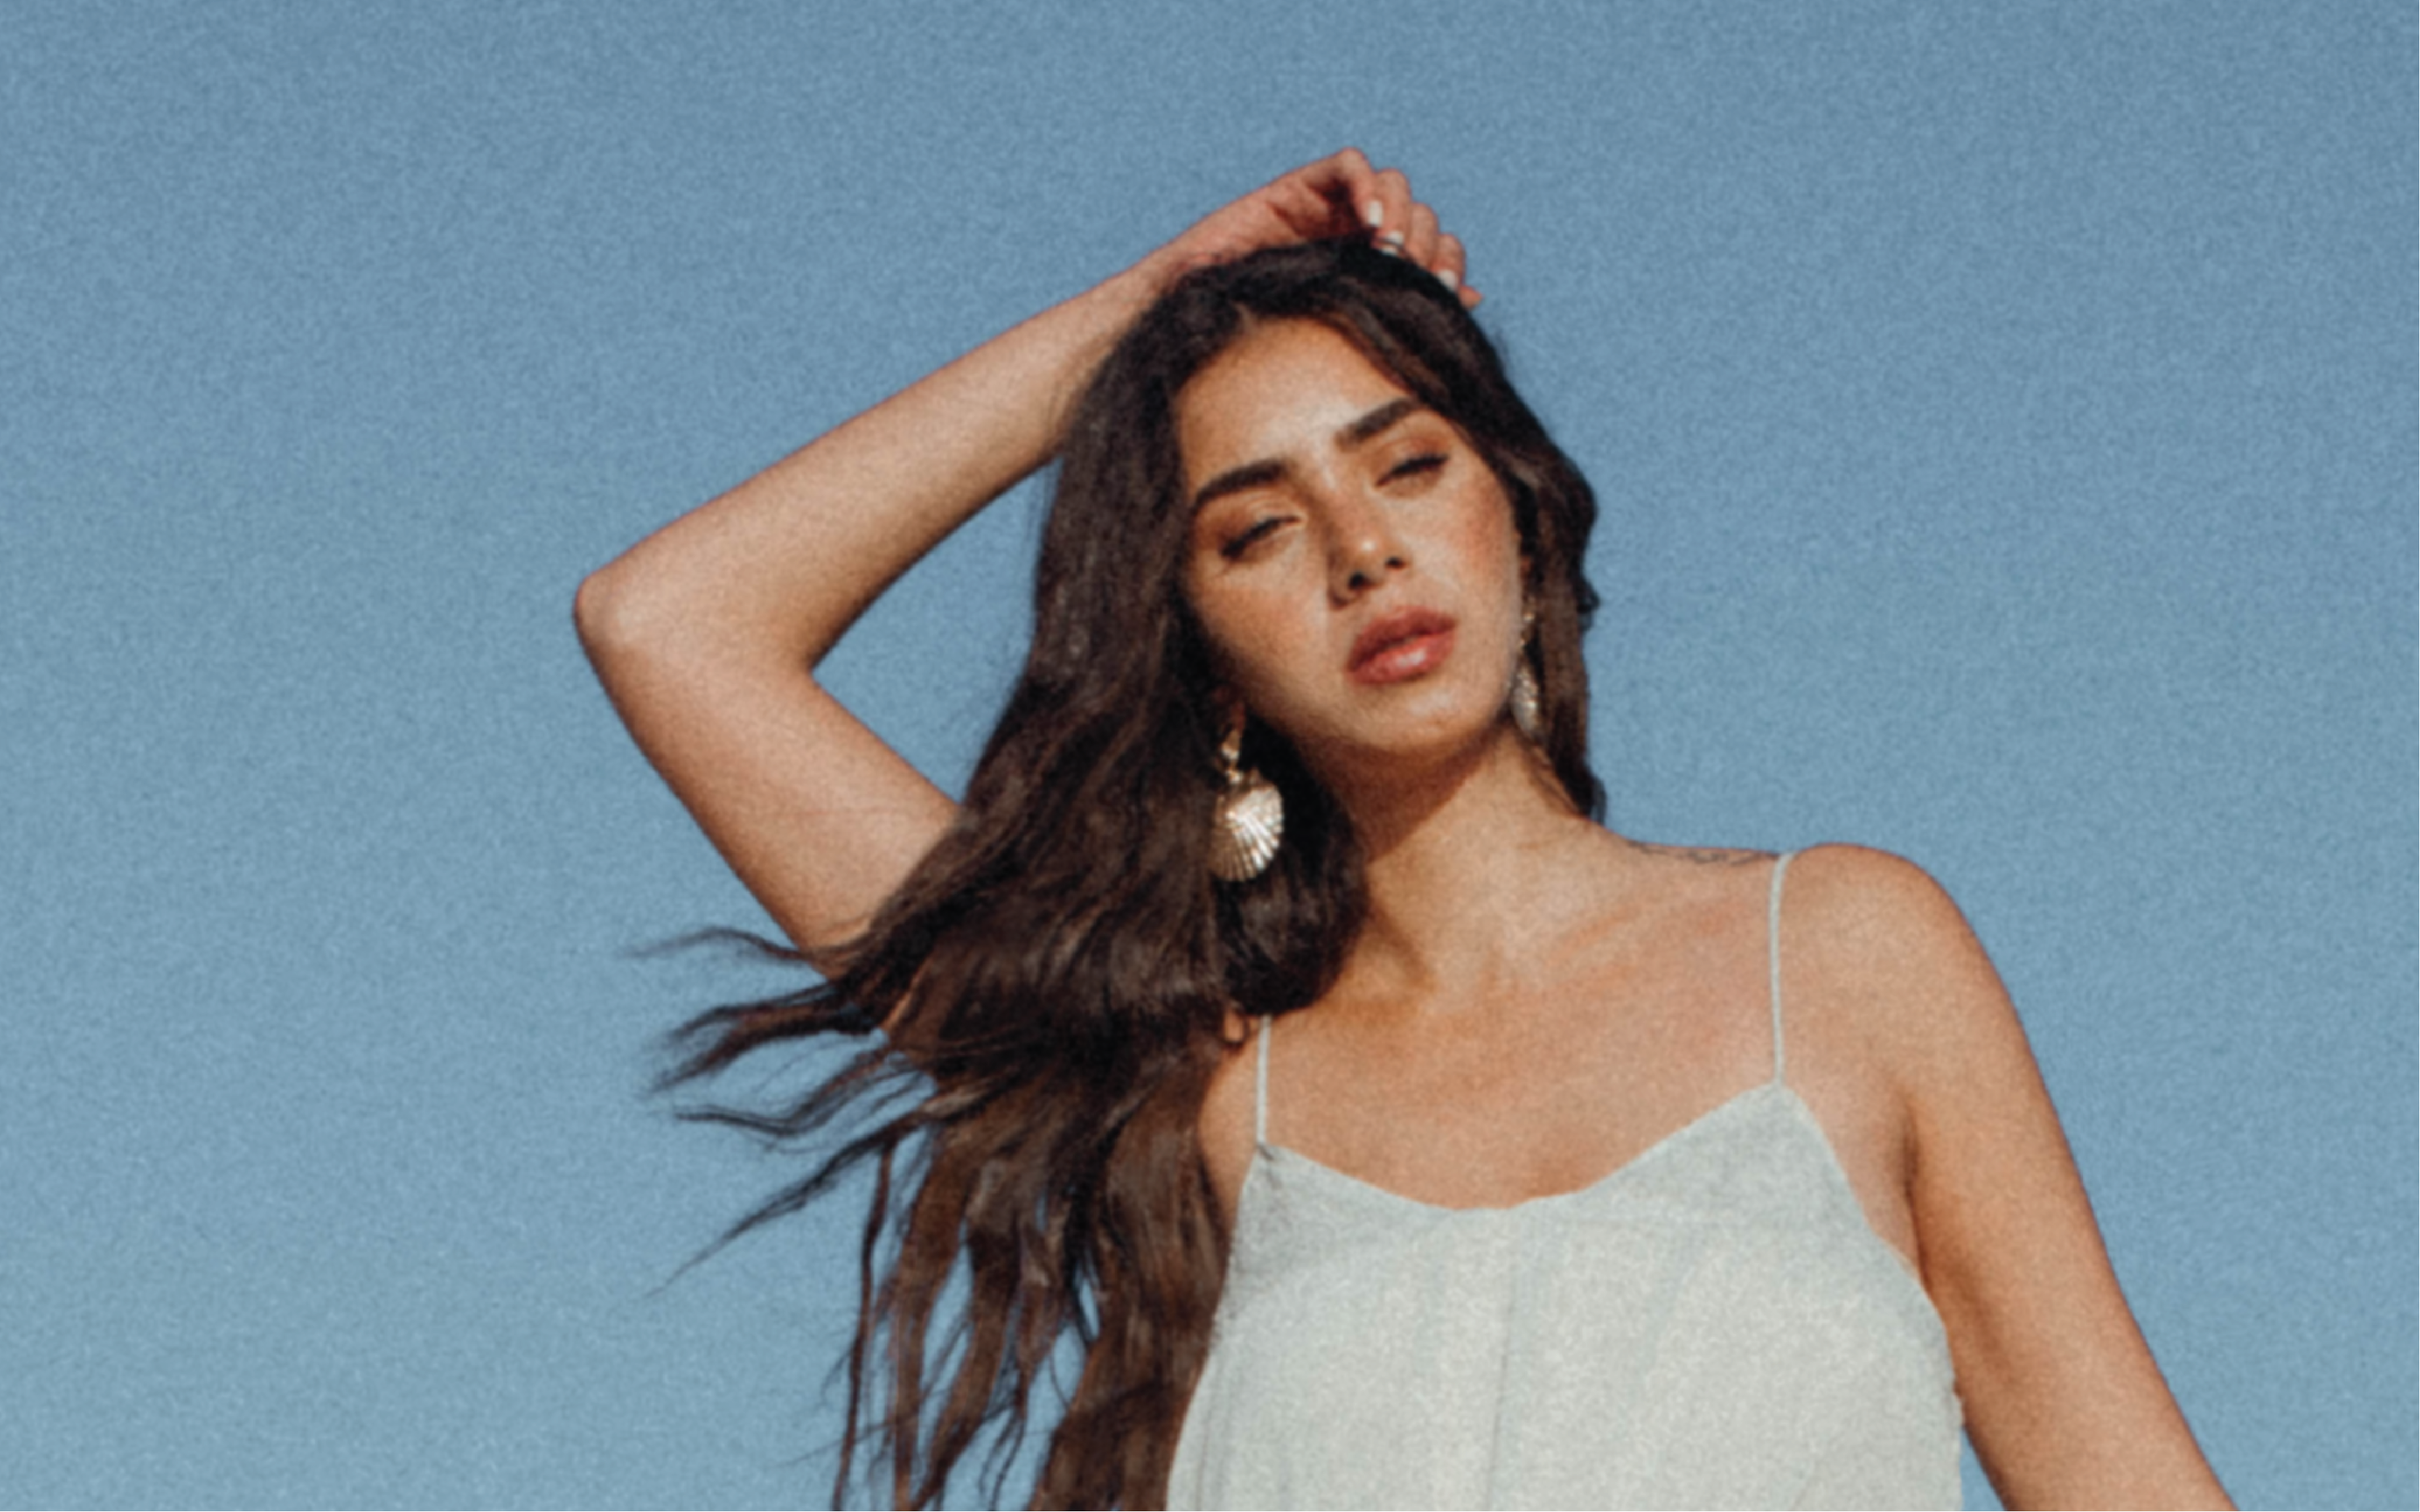 Egyptian Rising Star Malak Husseiny Releases New Music Video ‘You Are’ in Directorial Debut